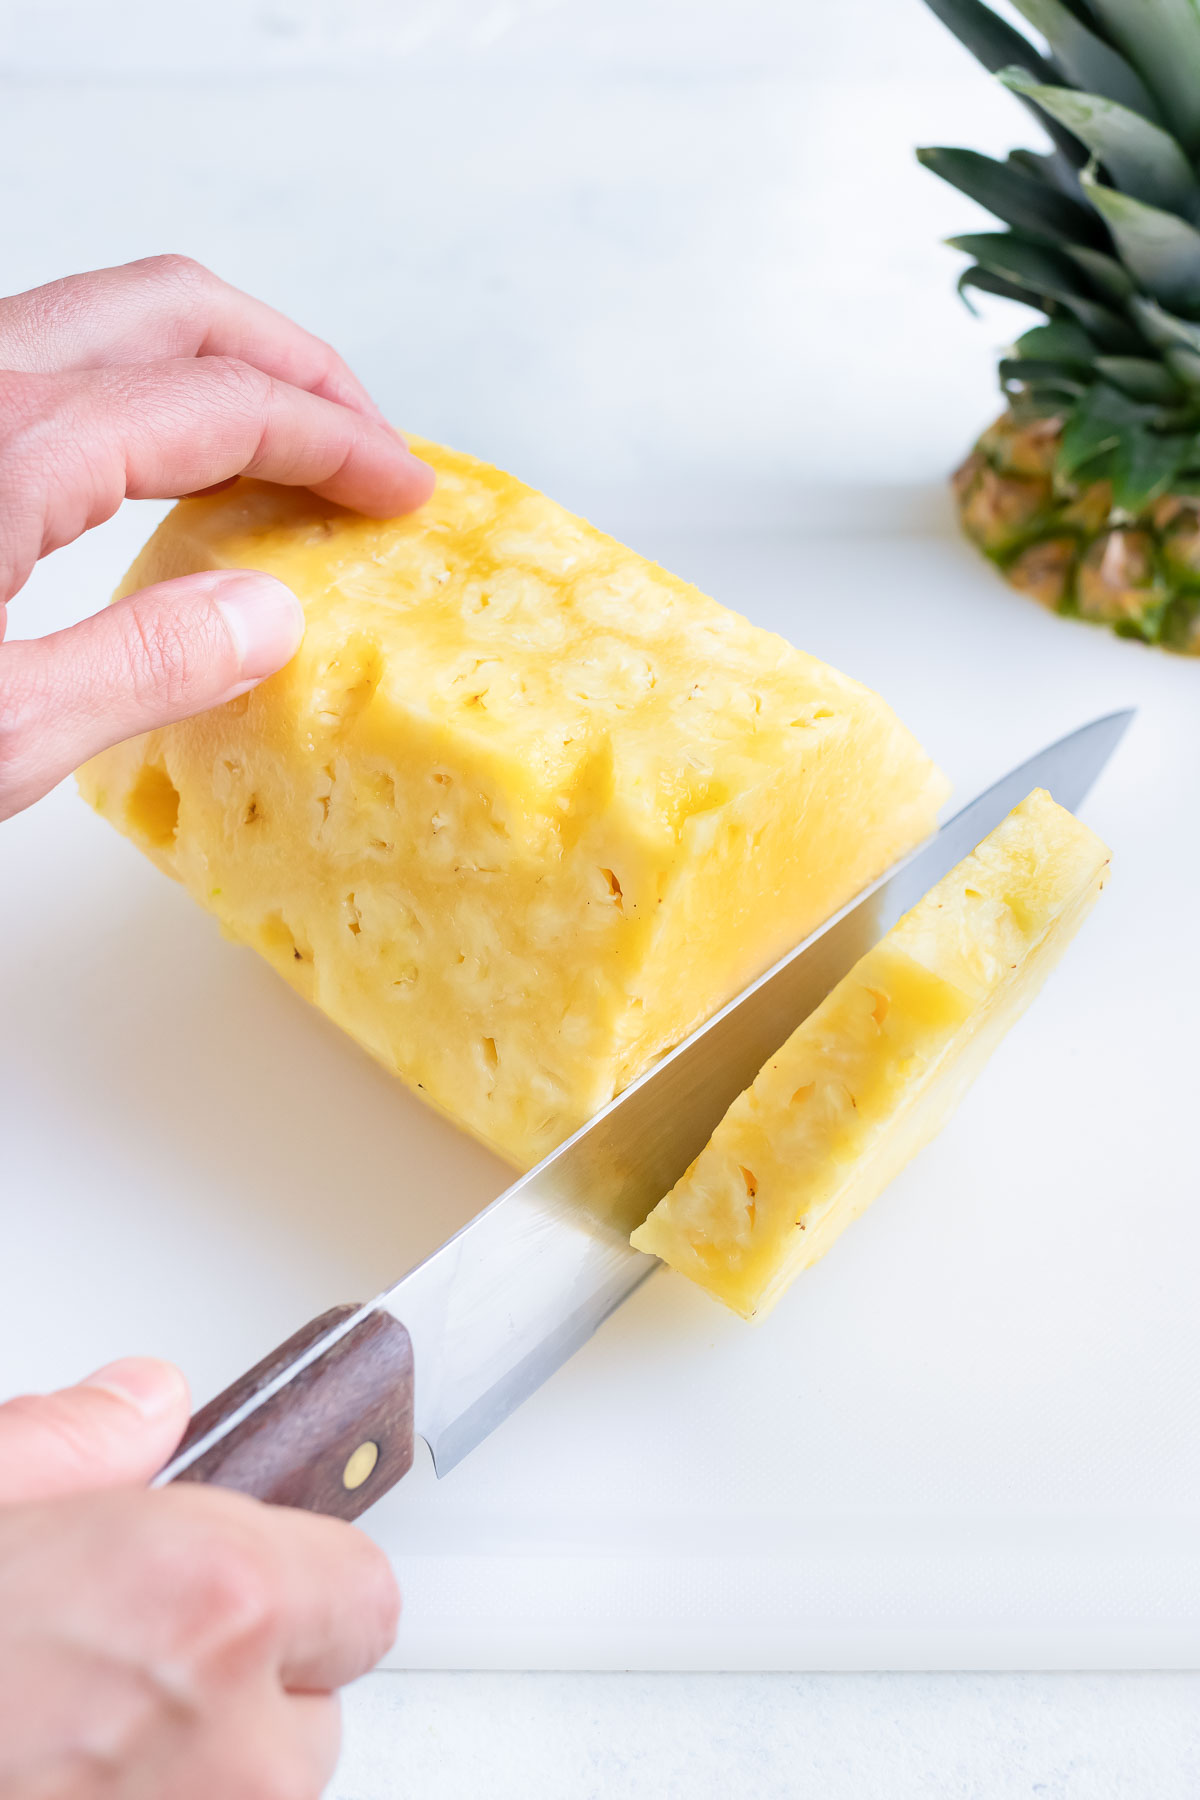 The pineapple is laid on it's side and cut into slices.